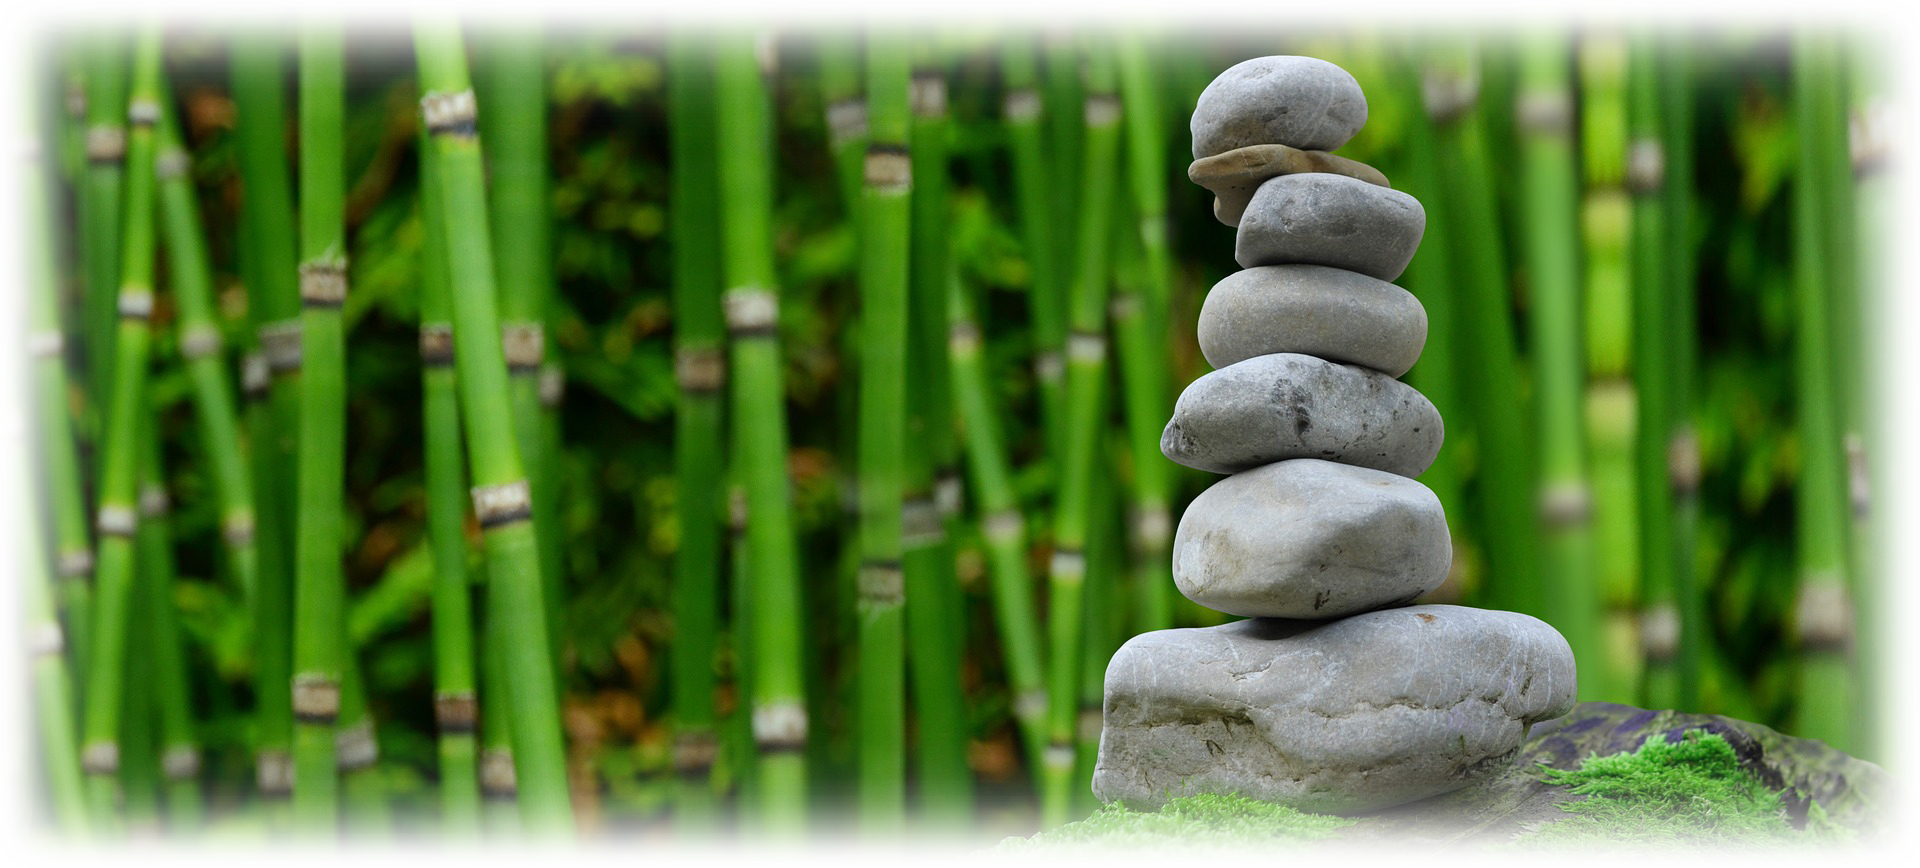 Zen bamboo forest with rock stacking